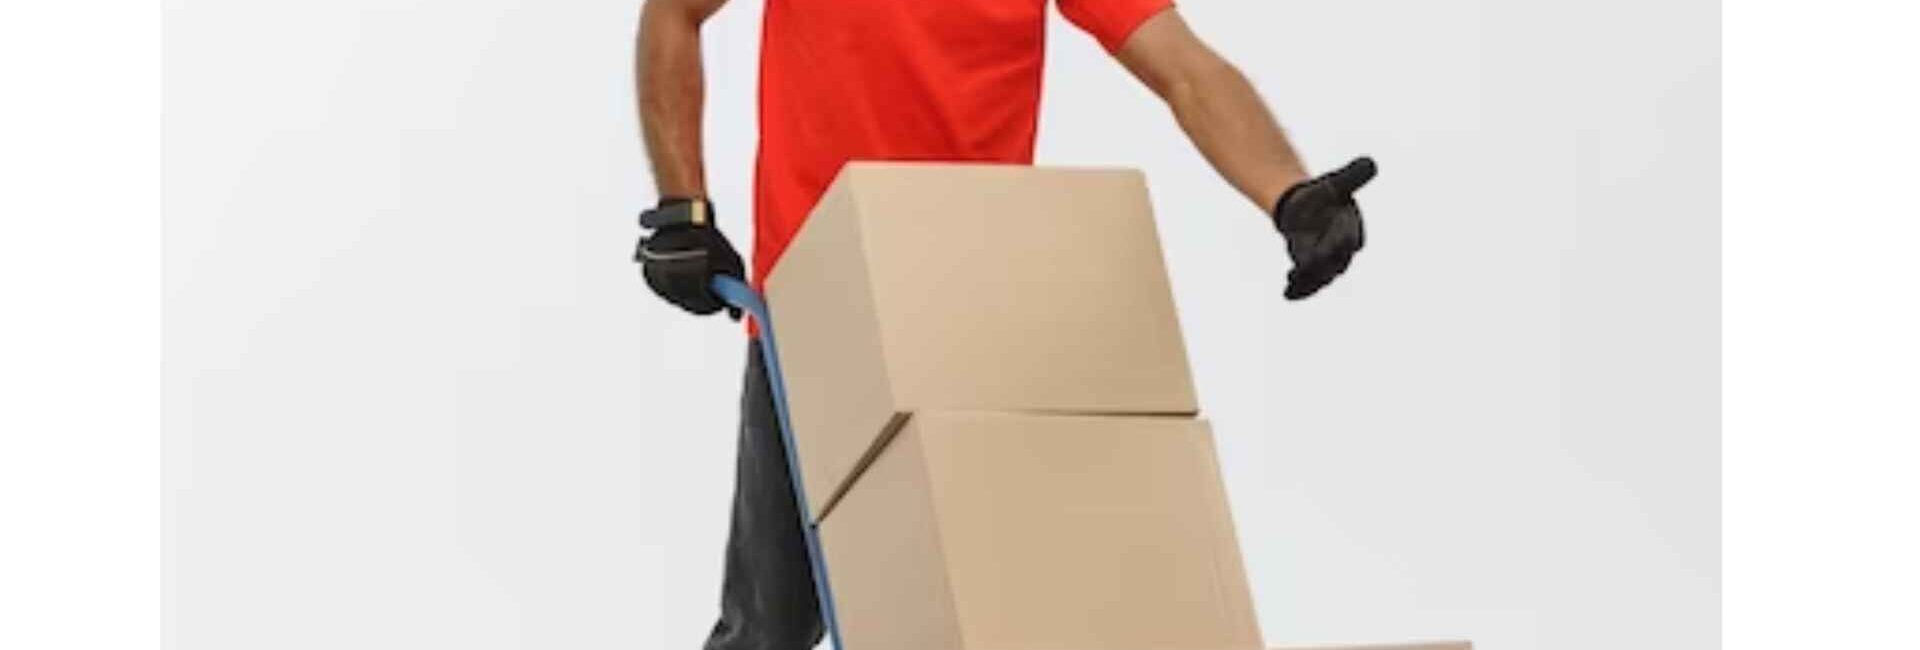 Reliable Packers and Movers In Noida - Expert Packers and Movers in Noida